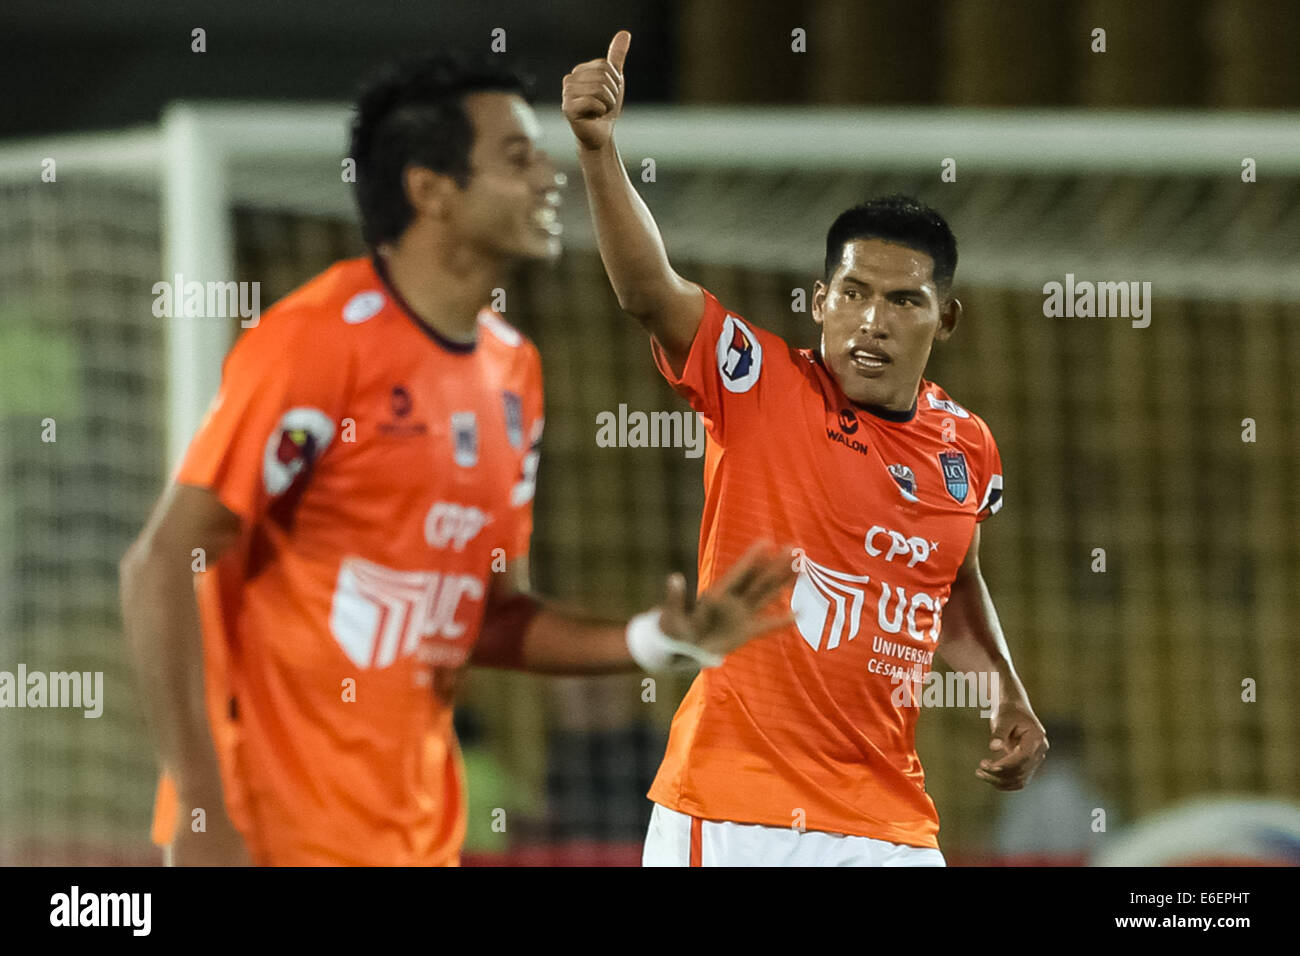 Bogota, Colombia. 21st Aug, 2014. Andy Pando (R), of Cesar Vallejo of Peru celebrates after scoring during the match of the South American Cup, against Millonarios of Colombia, in Bogota, capital of Colombia, on Aug. 21, 2014. Credit:  Jhon Paz/Xinhua/Alamy Live News Stock Photo